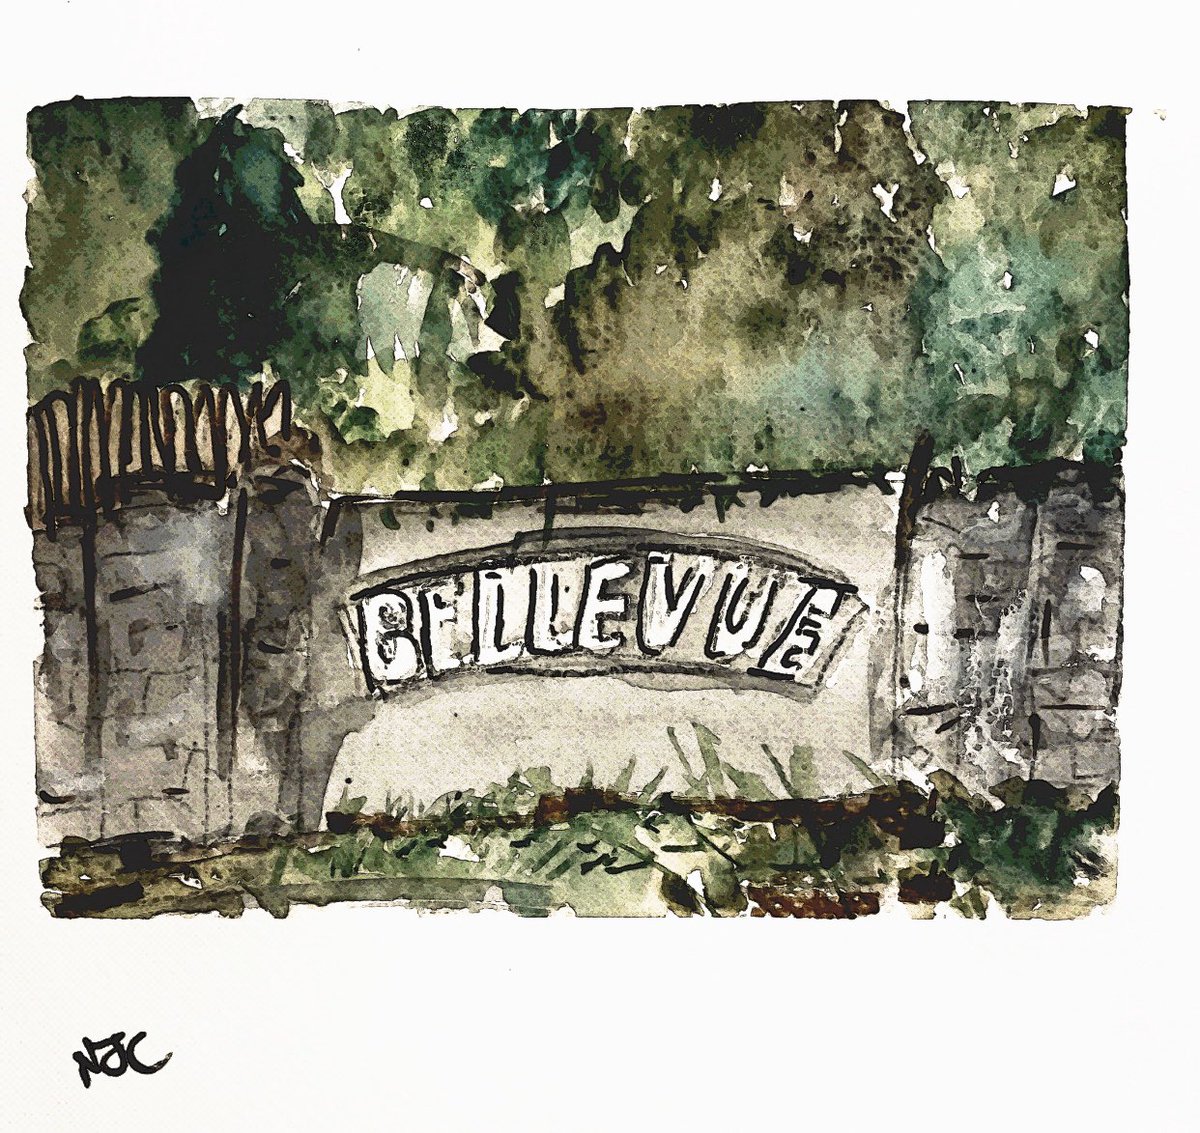 Passed these iconic steps every day on the bus to school for seven years and back.... #bellevuezoo #bellevuebelast #belfastcity #glengormley #zoo #iconic #oldbelfast #art #illustrations #memories #watercolours #watercolors #aquarelle #belfastartist #belfasthour